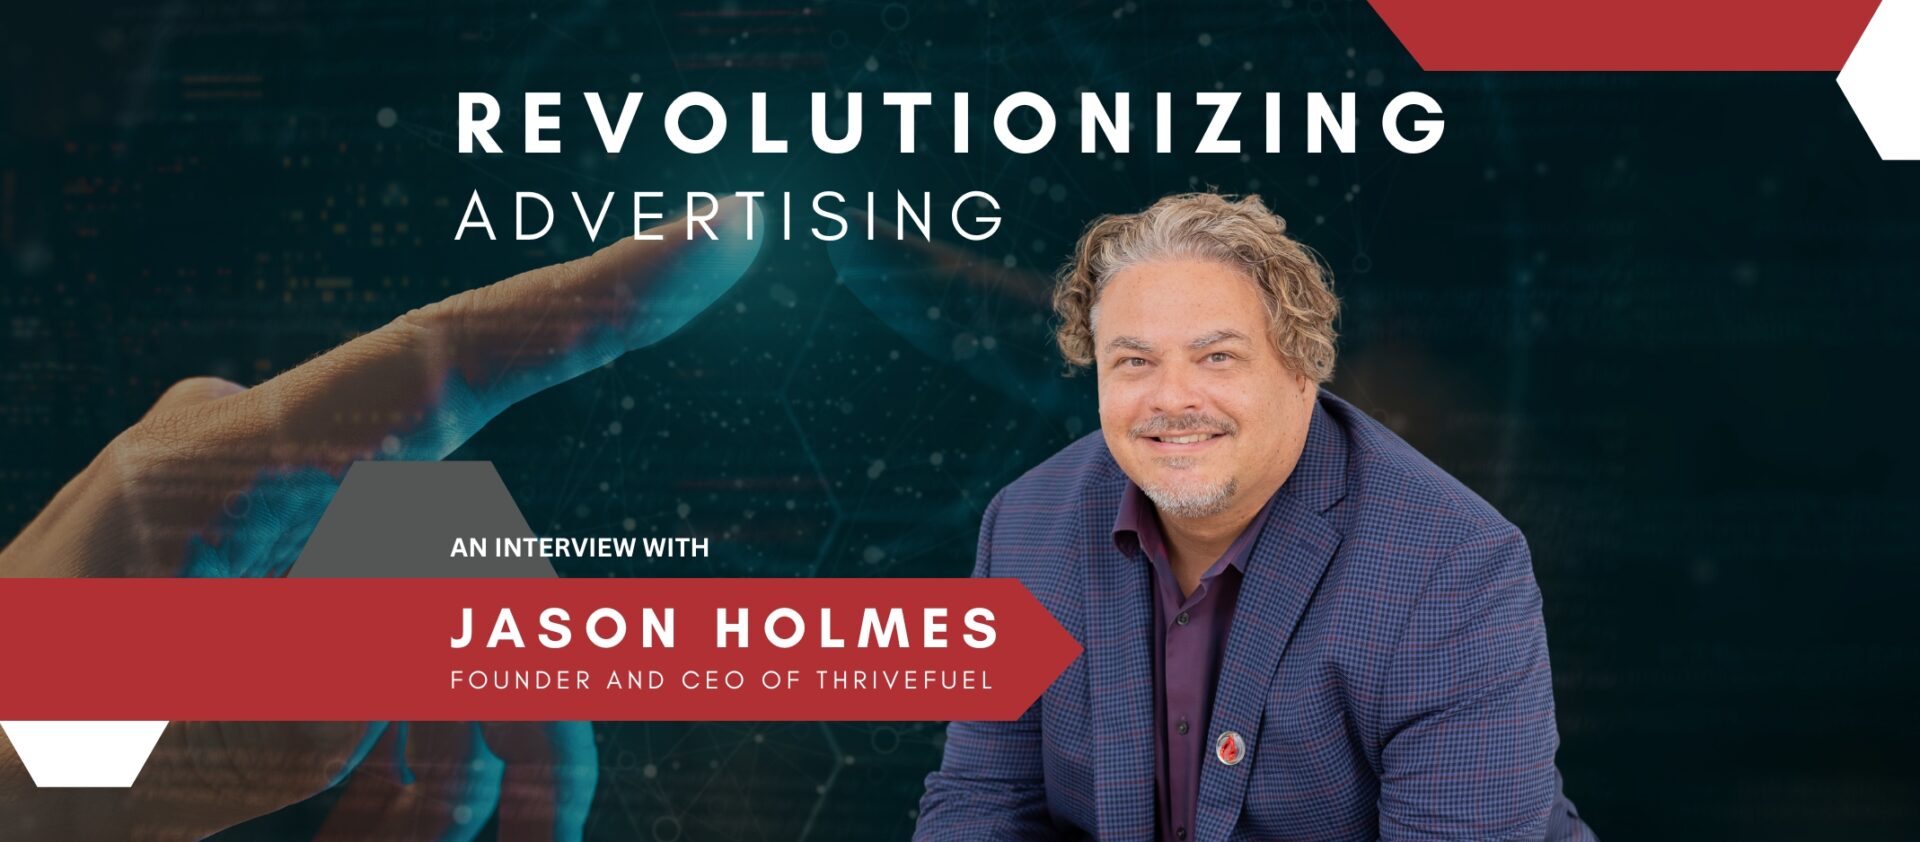 Revolutionizing Advertising: An Interview with Jason Holmes, founder and CEO of ThriveFuel Marketing